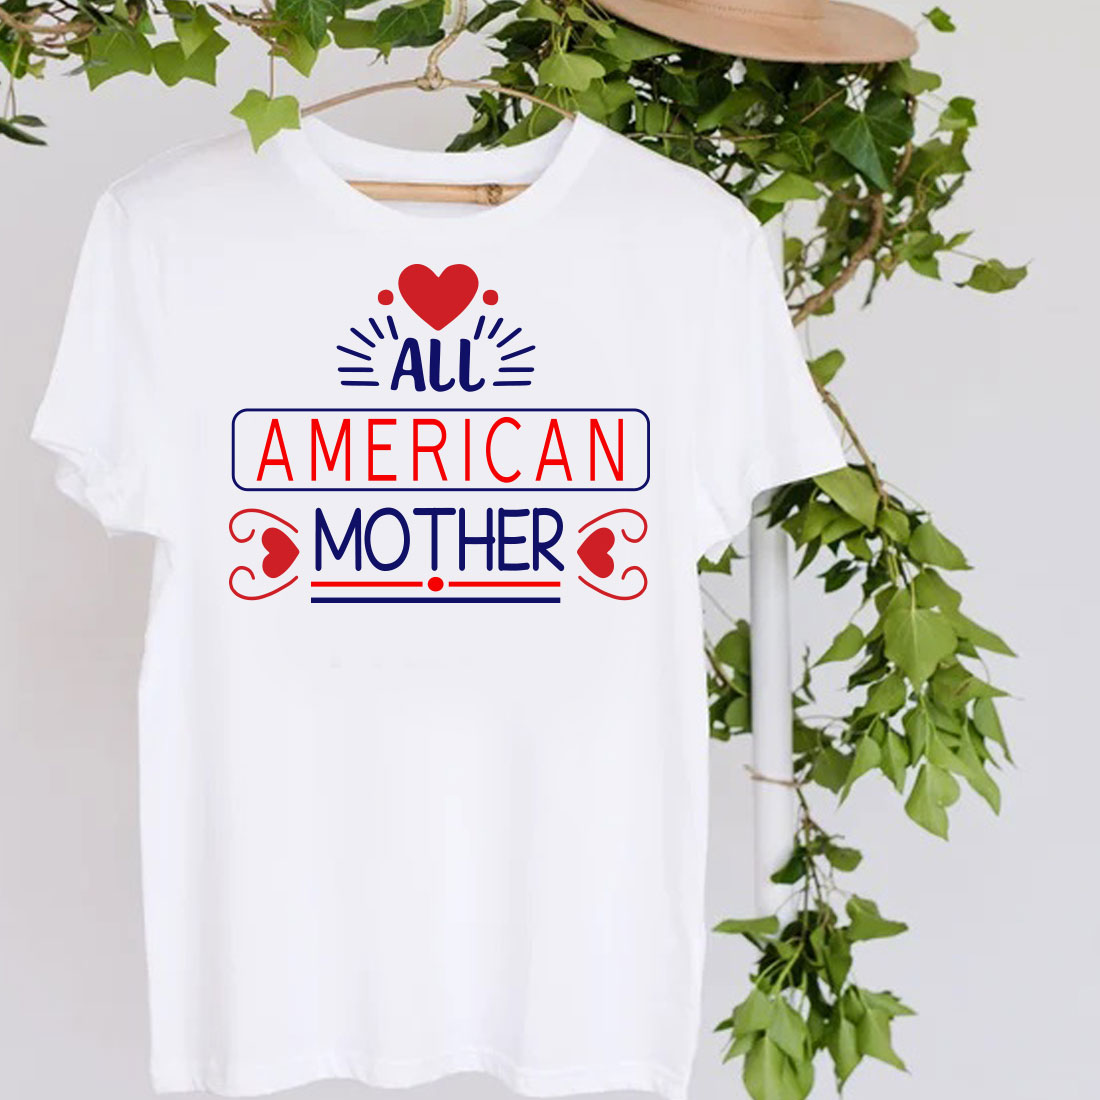 White t - shirt with the words all american mother printed on it.